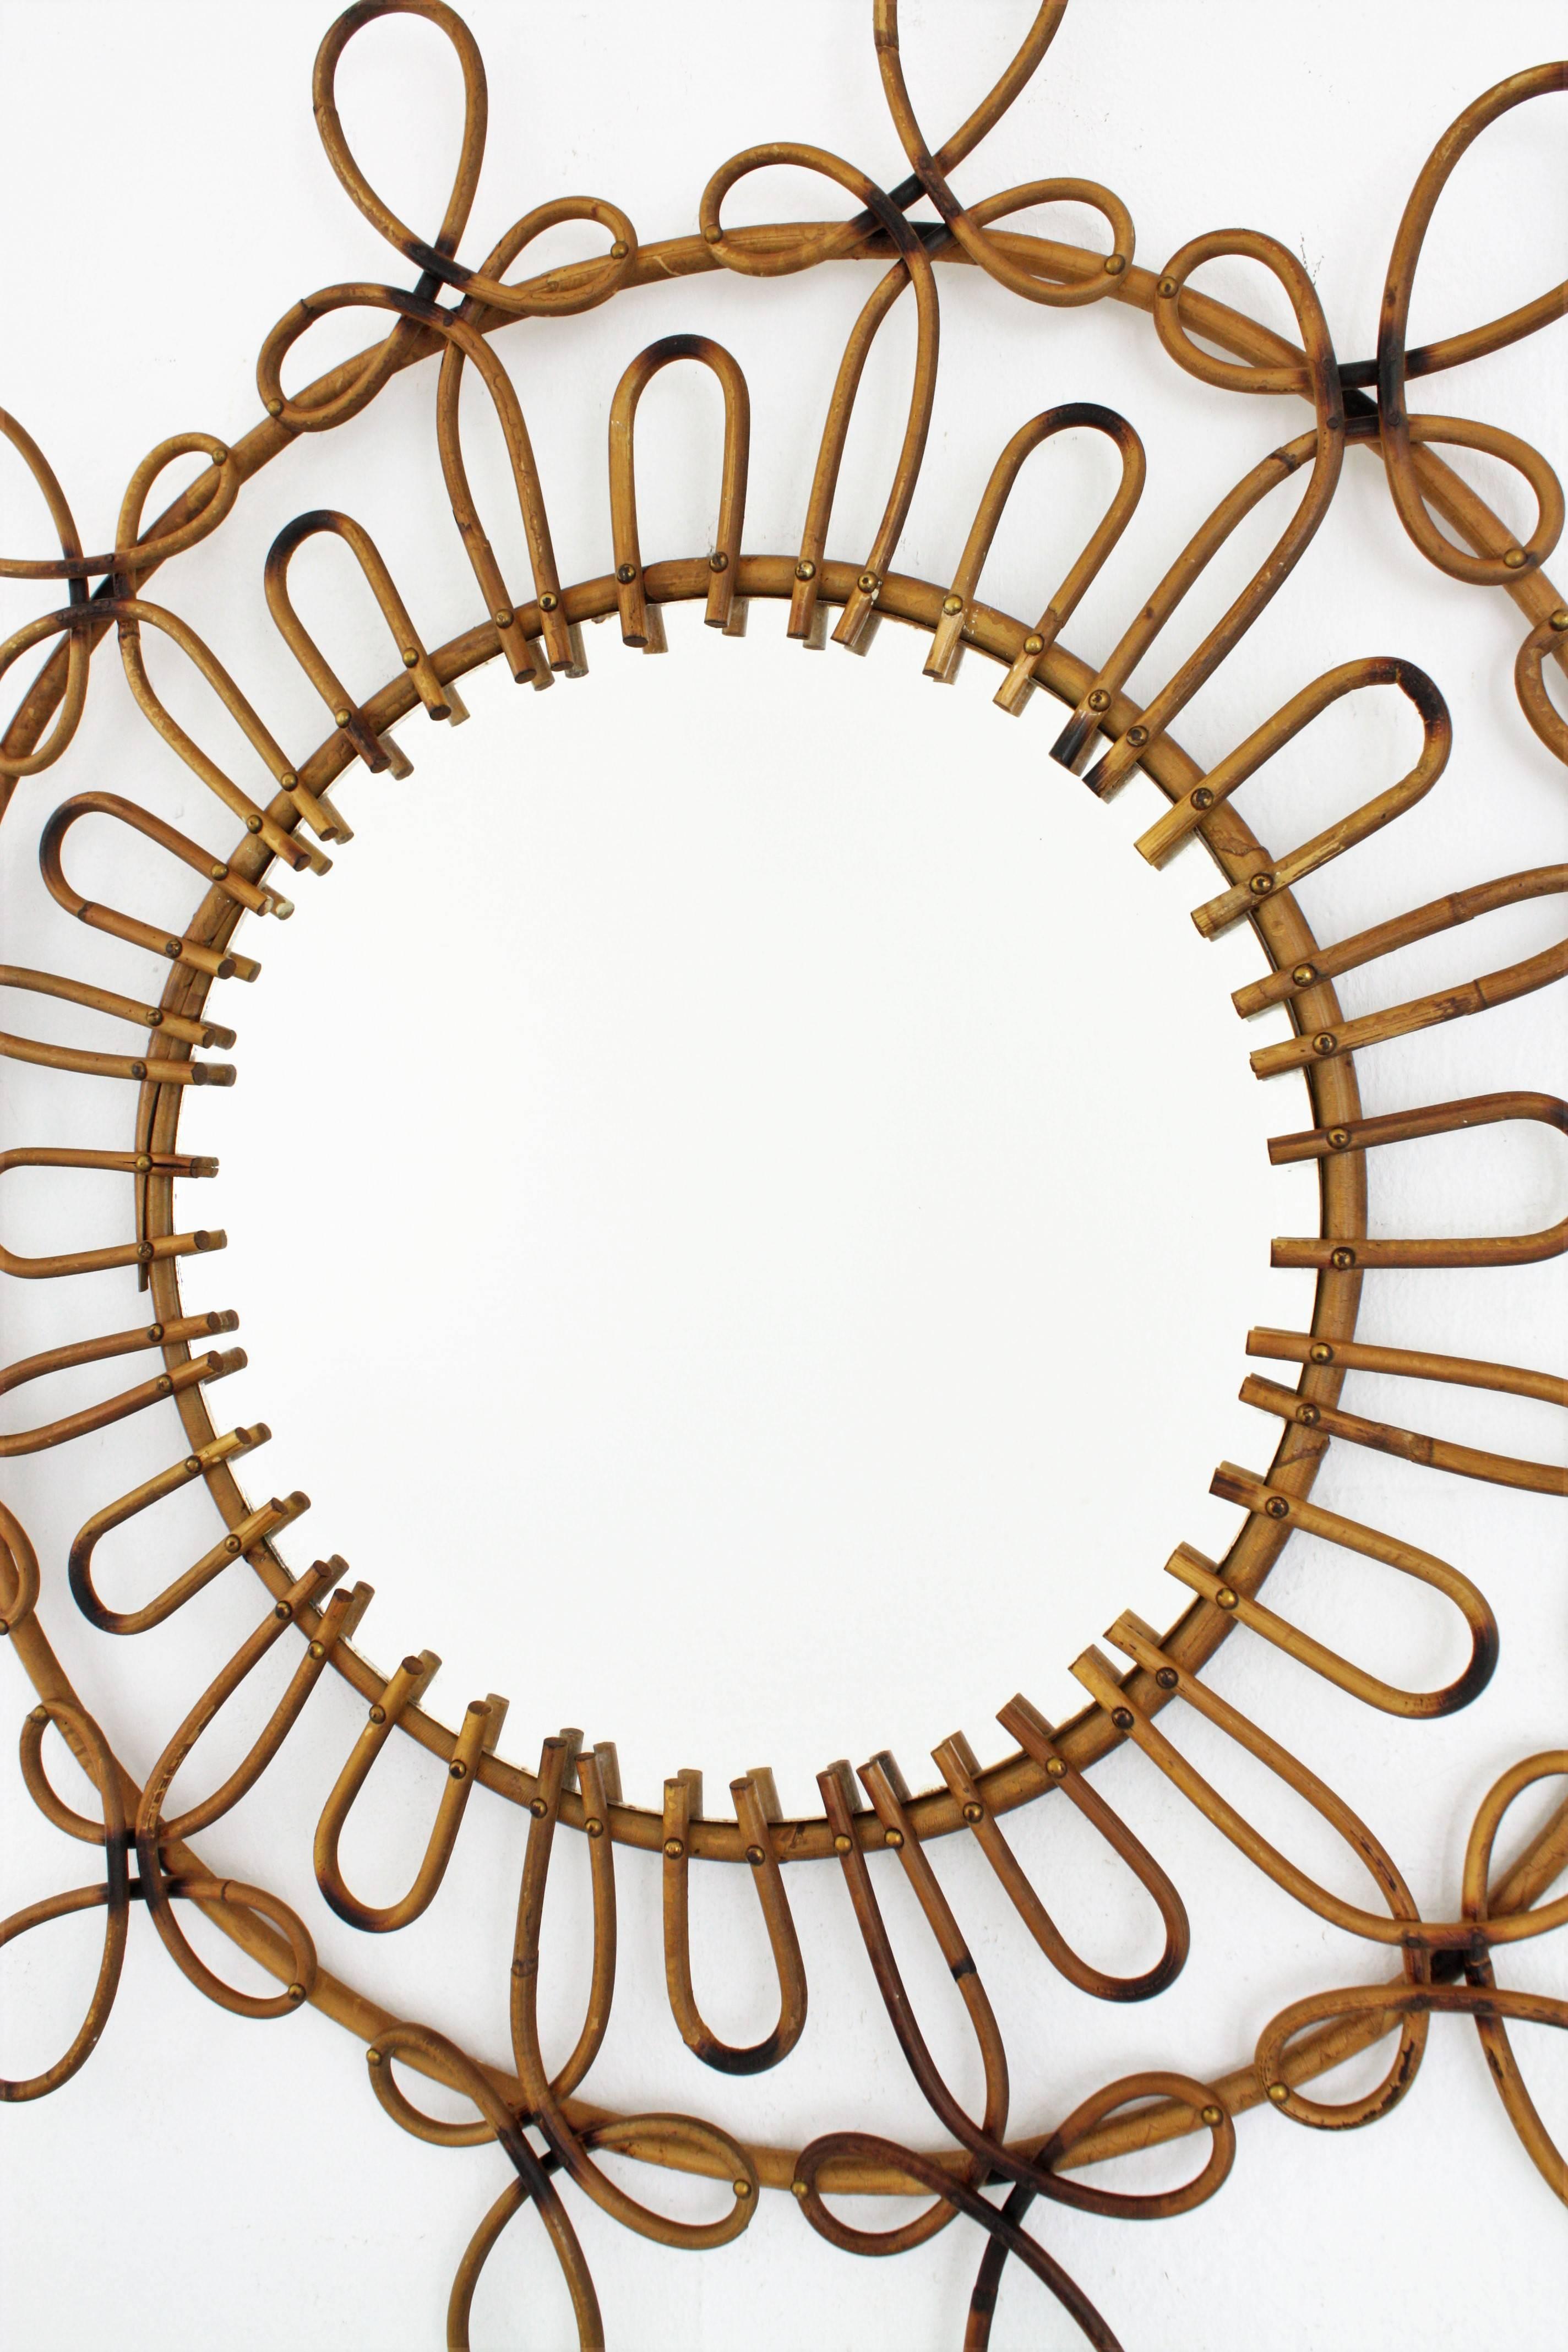 Mid-Century Modern Spanish Rattan and Wicker Flower Burst Mirror with Loops and Pyrography Details